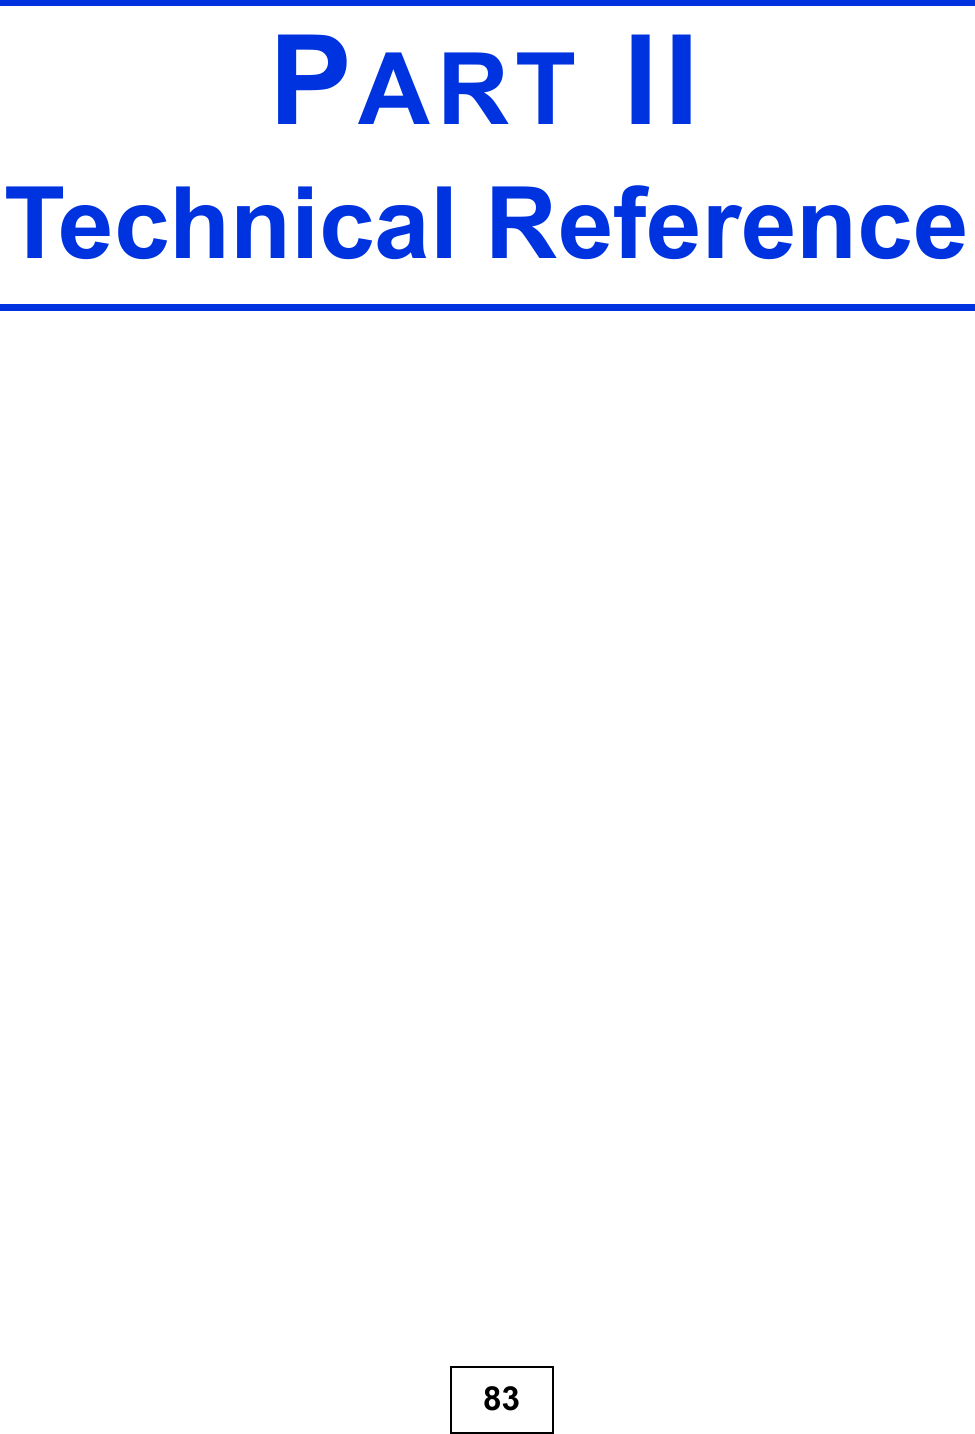 83PART IITechnical Reference